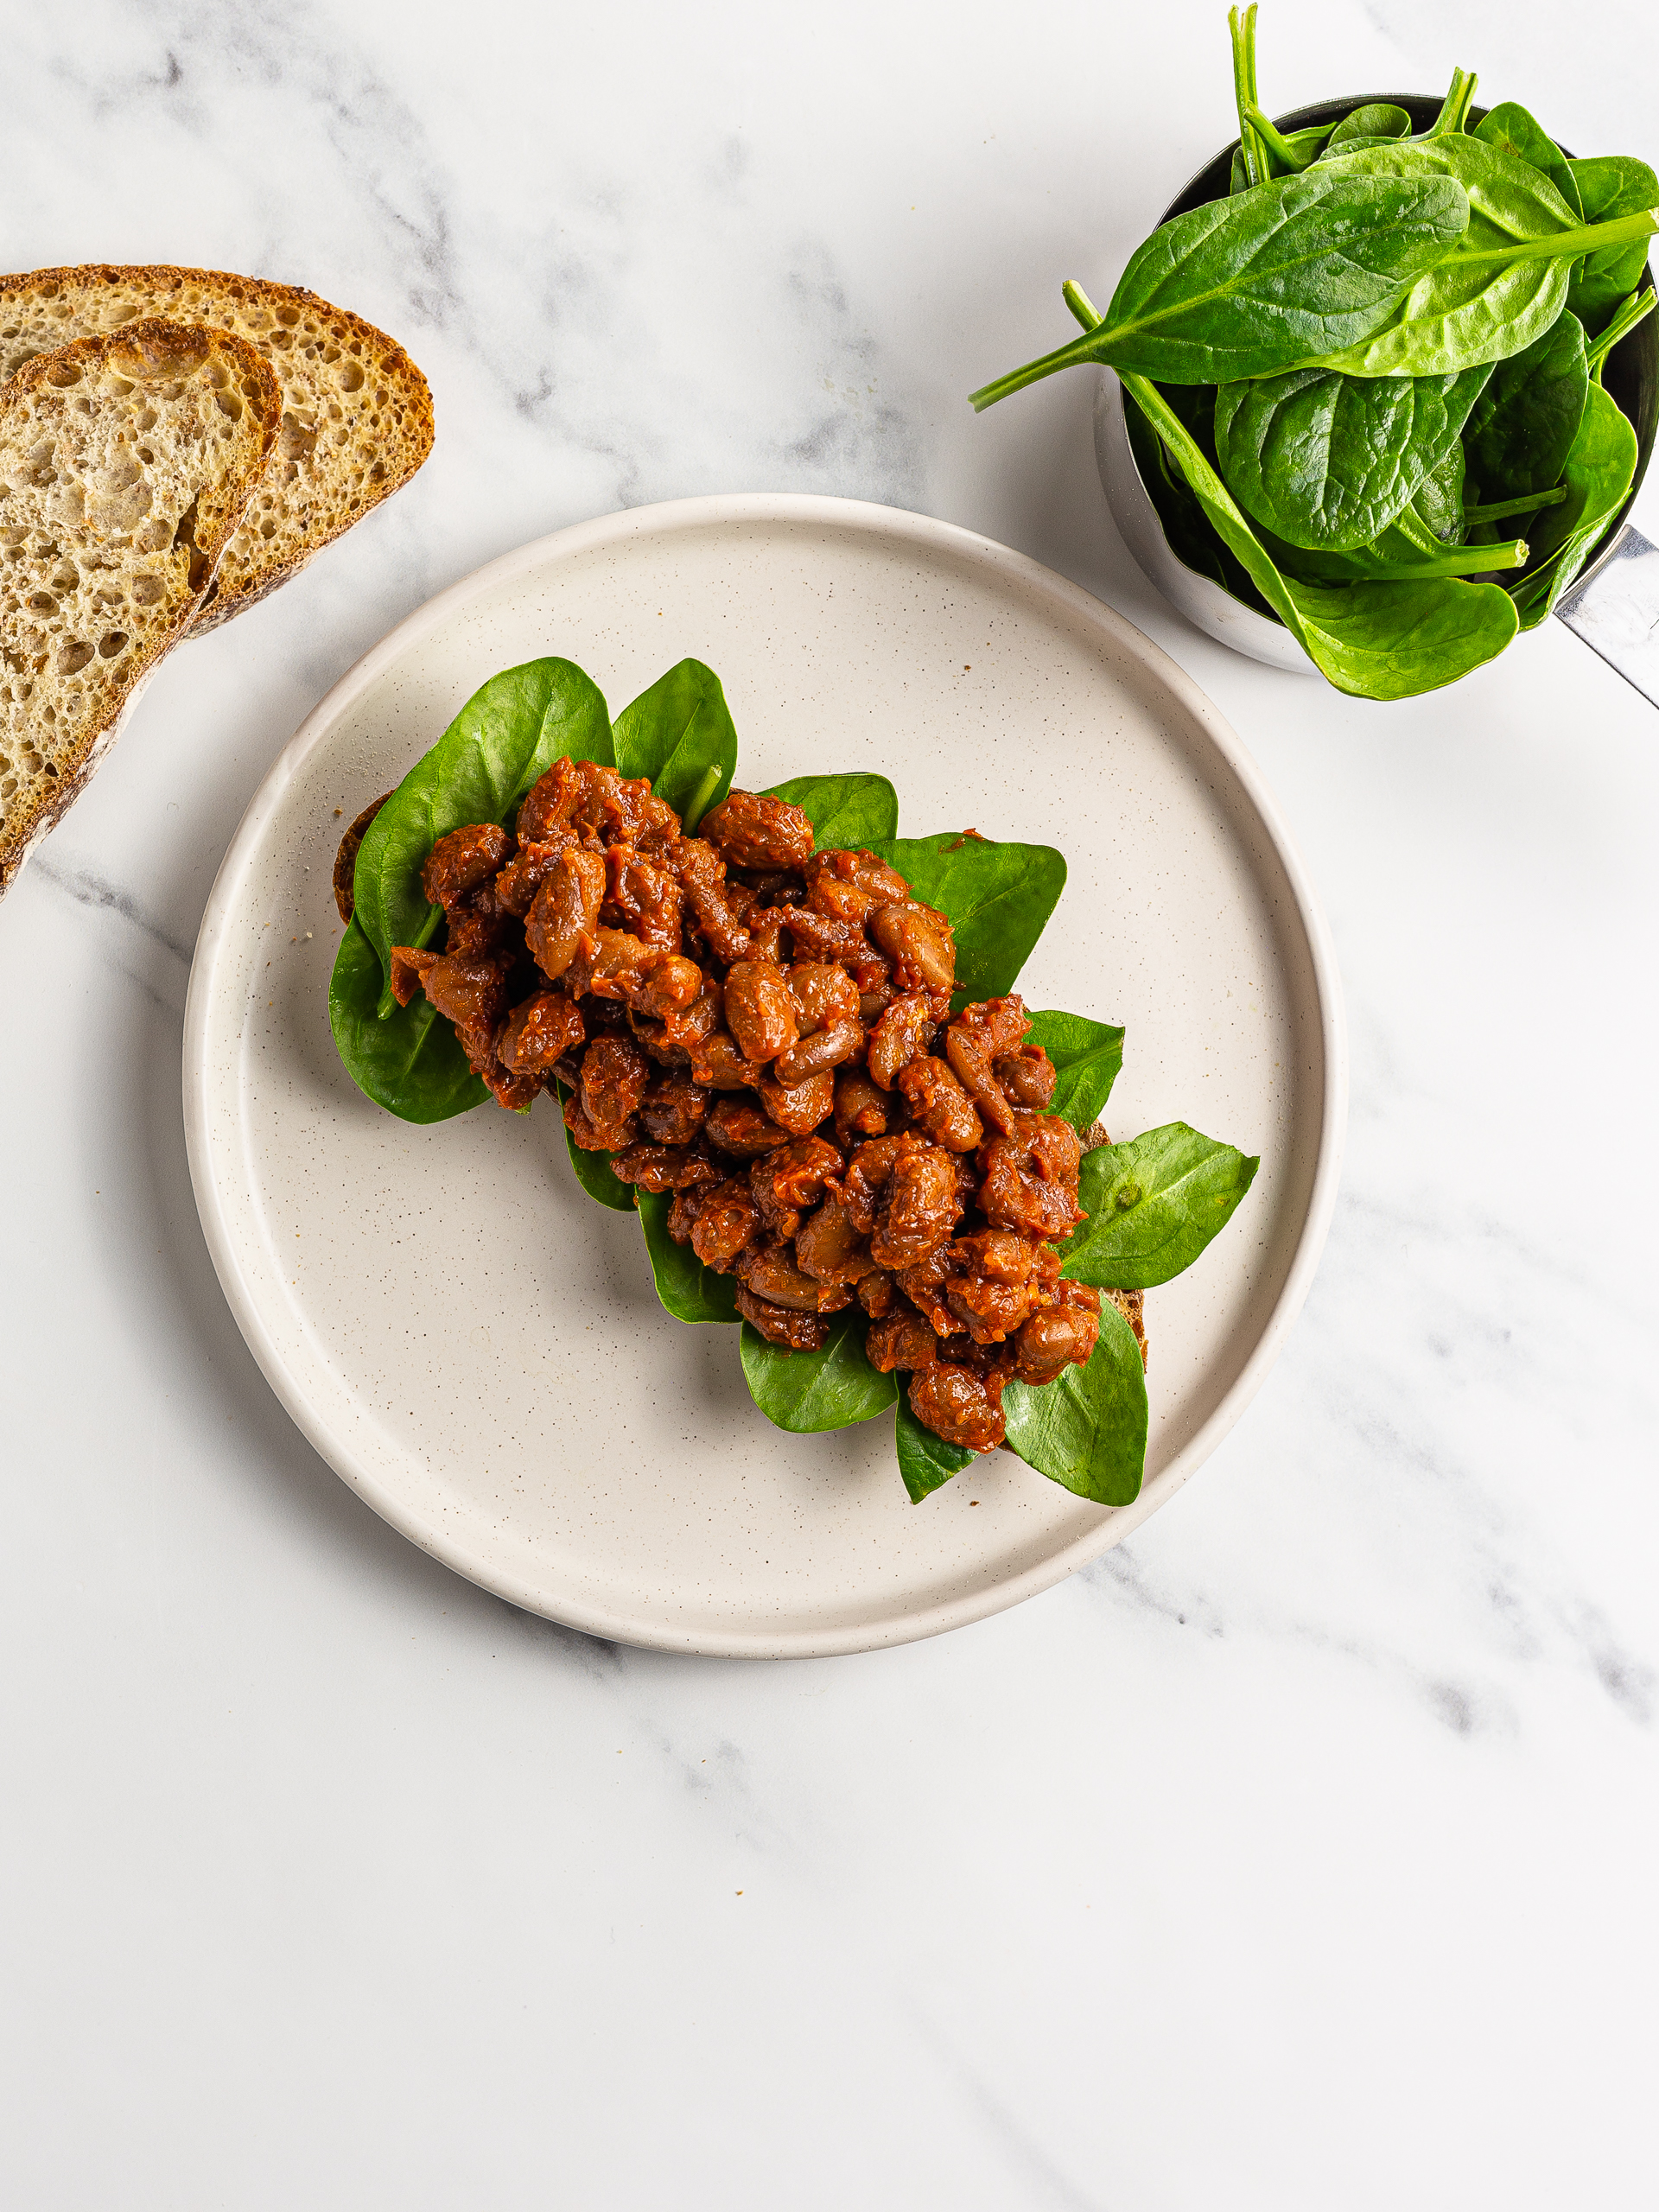 maple baked beans with spinach and sourdough bread toast